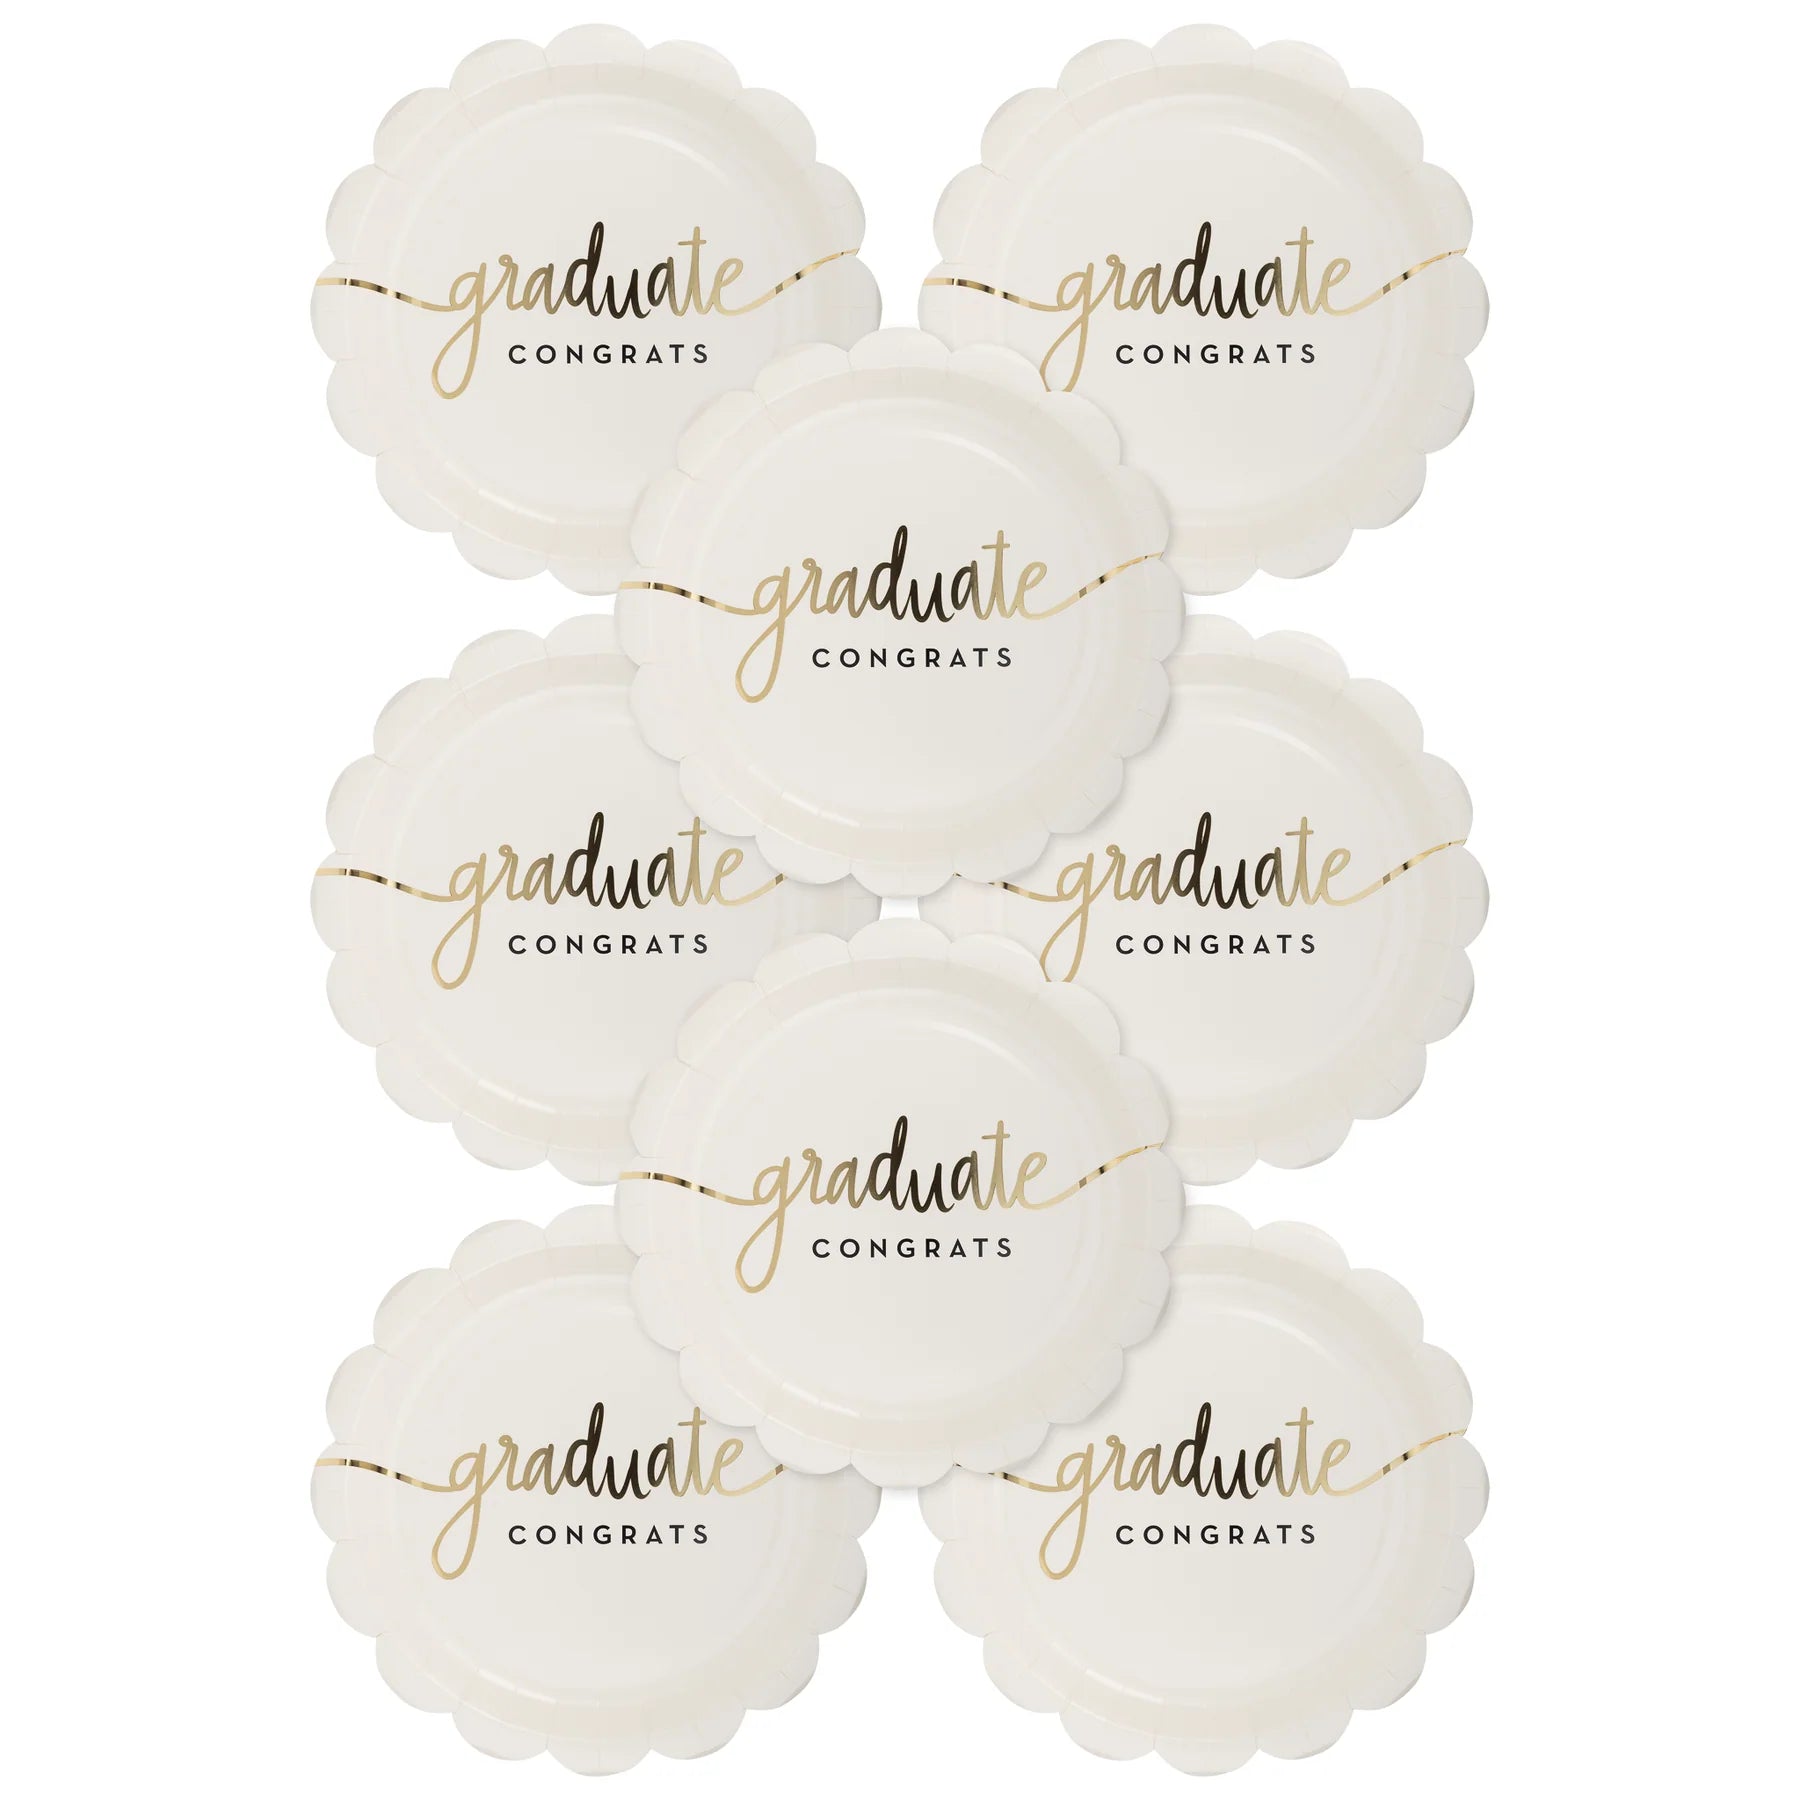 scalloped white with gold script graduate congrats - cocktail plates- pack of 8